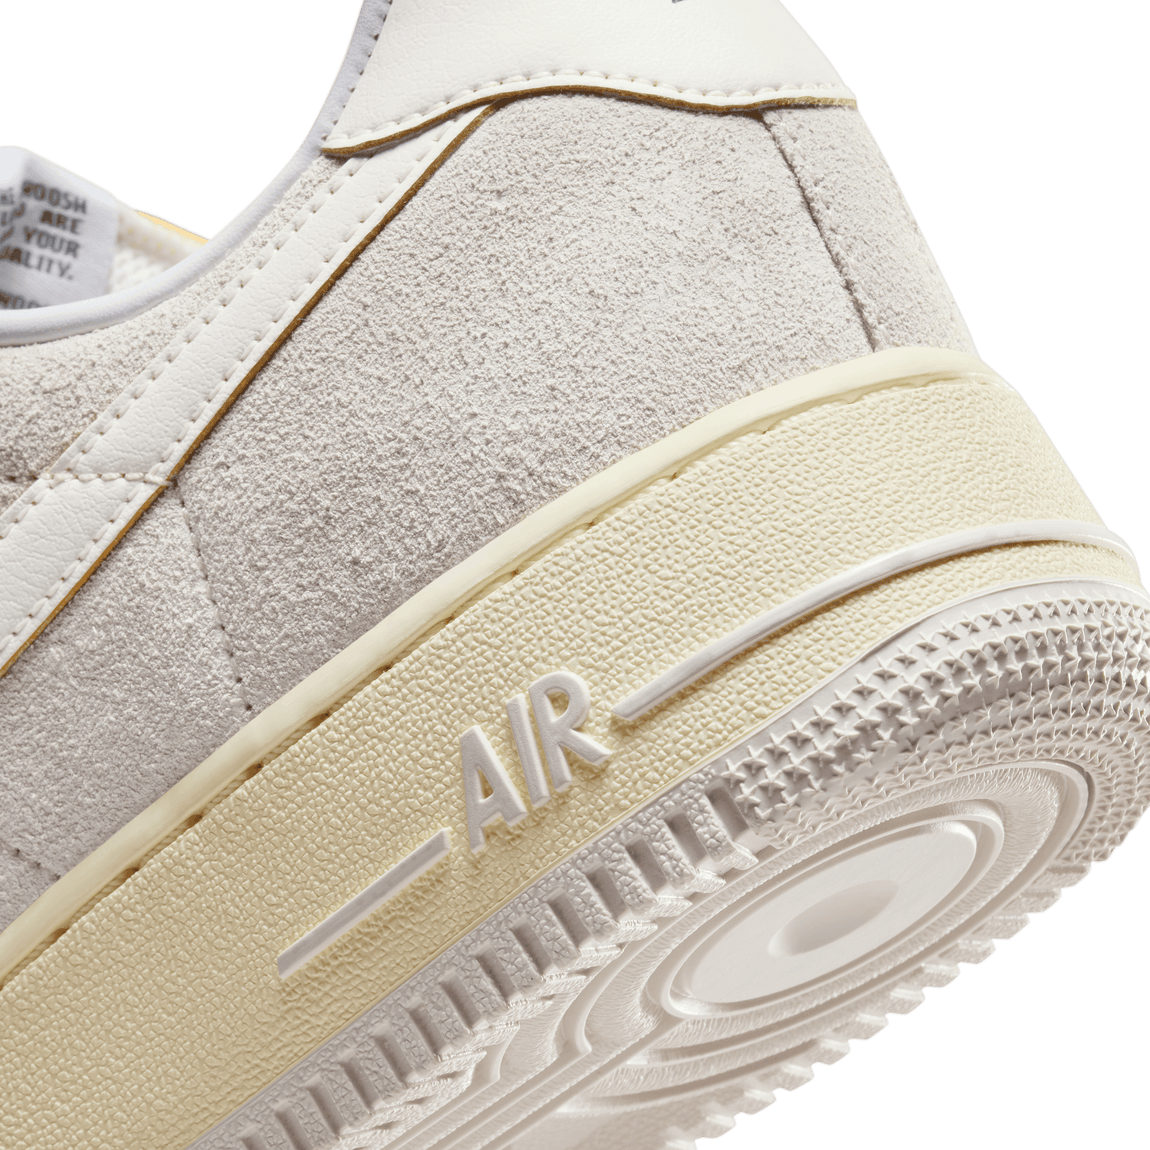 Nike Air Force 1 Low “Athletic Department” (Light Orewood Brown/Sail) - Nike Air Force 1 Low “Athletic Department” (Light Orewood Brown/Sail) - 